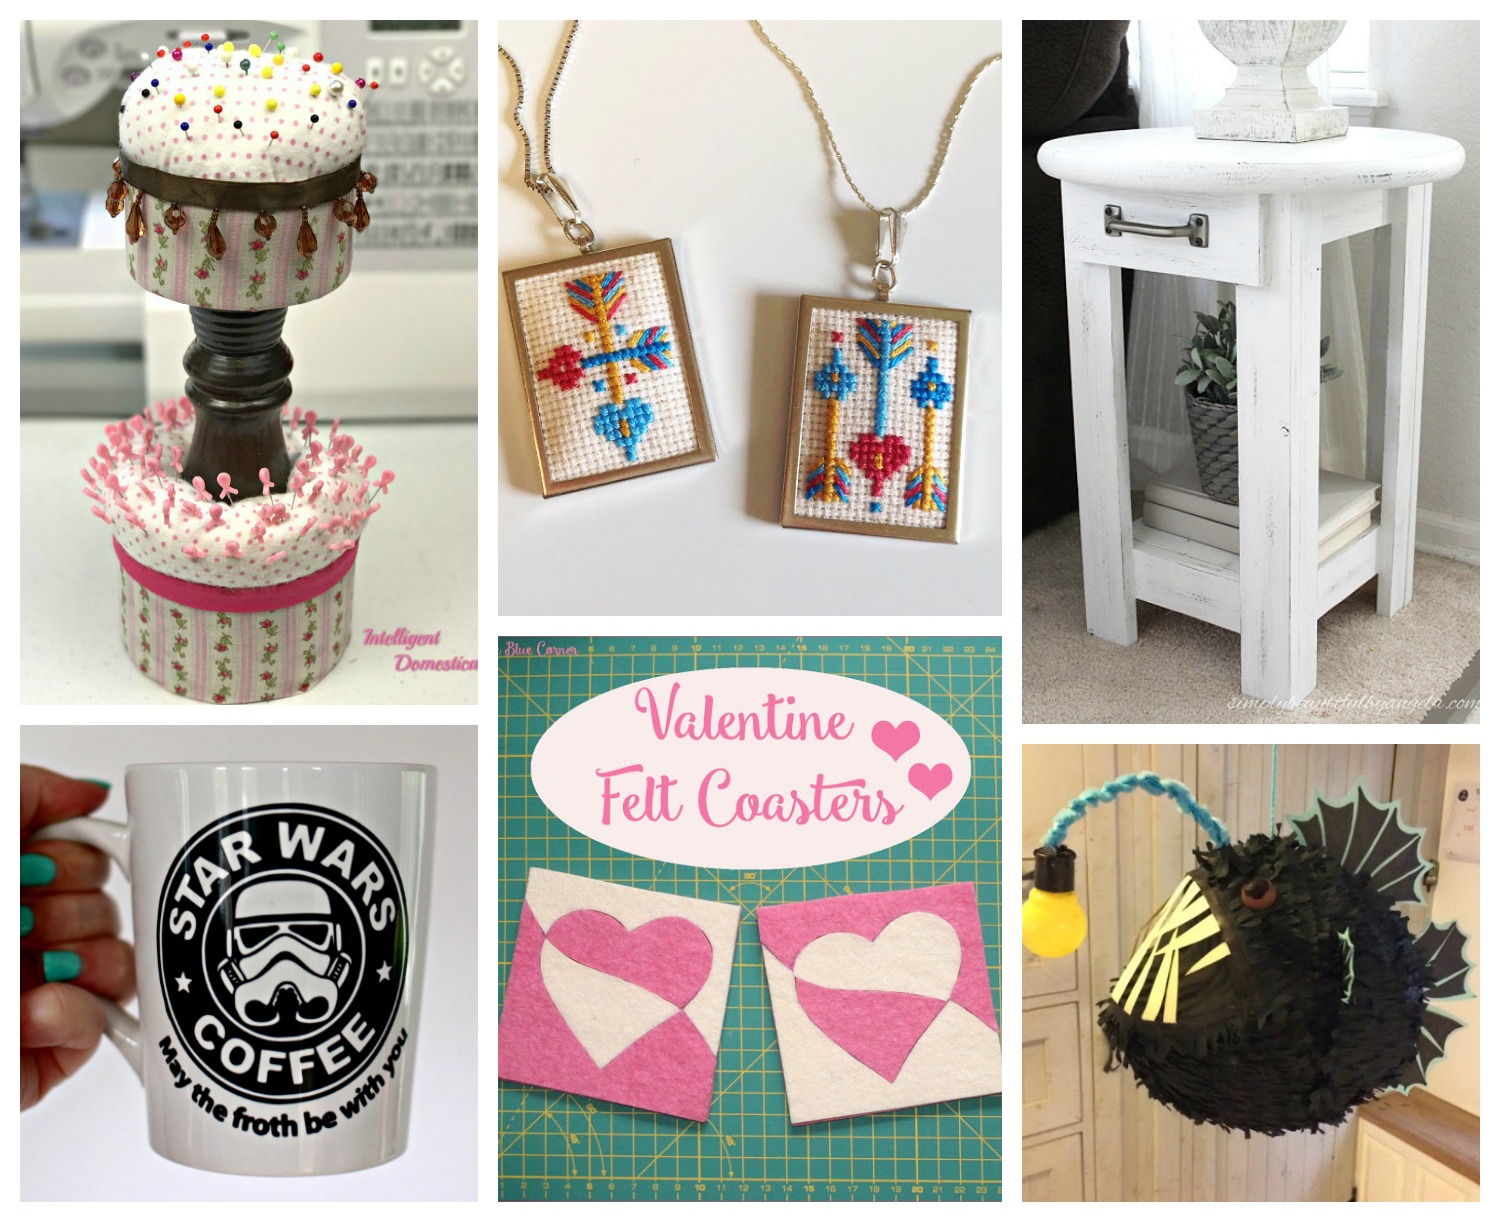 Sew Can Do: Valentine's Craftastic Monday Link Party